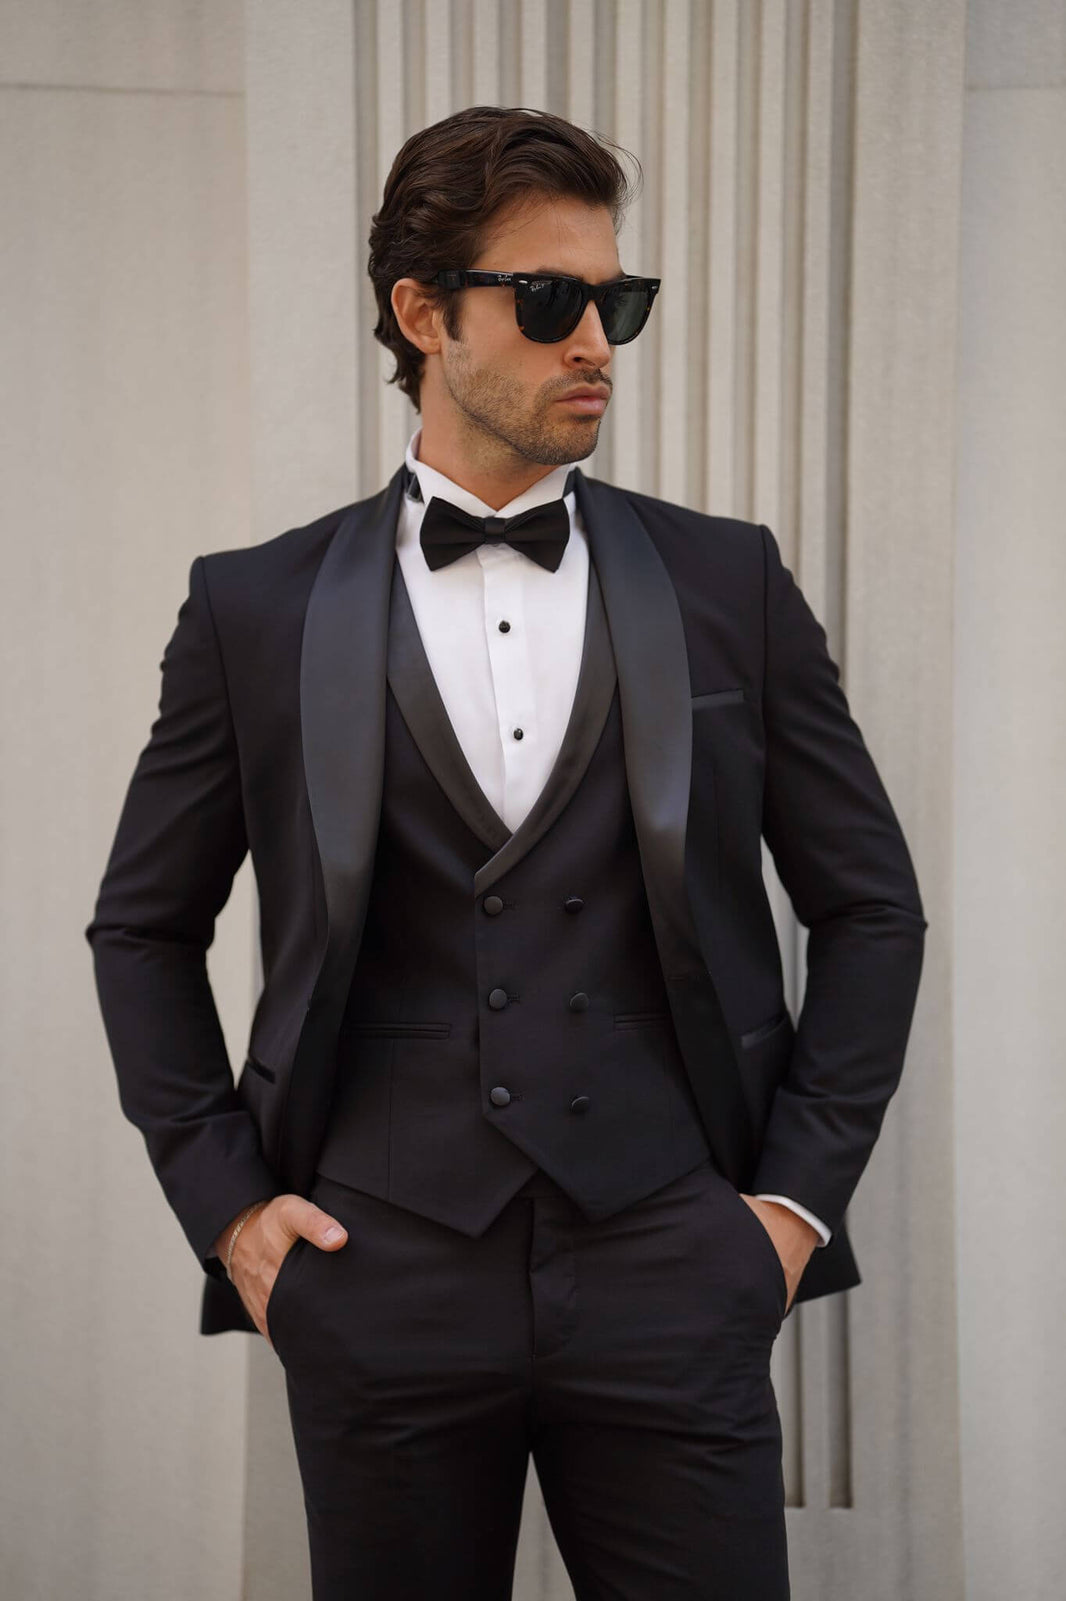 Men's Tuxedo Collection: The Perfect Formal Attire for Any Occasion ...